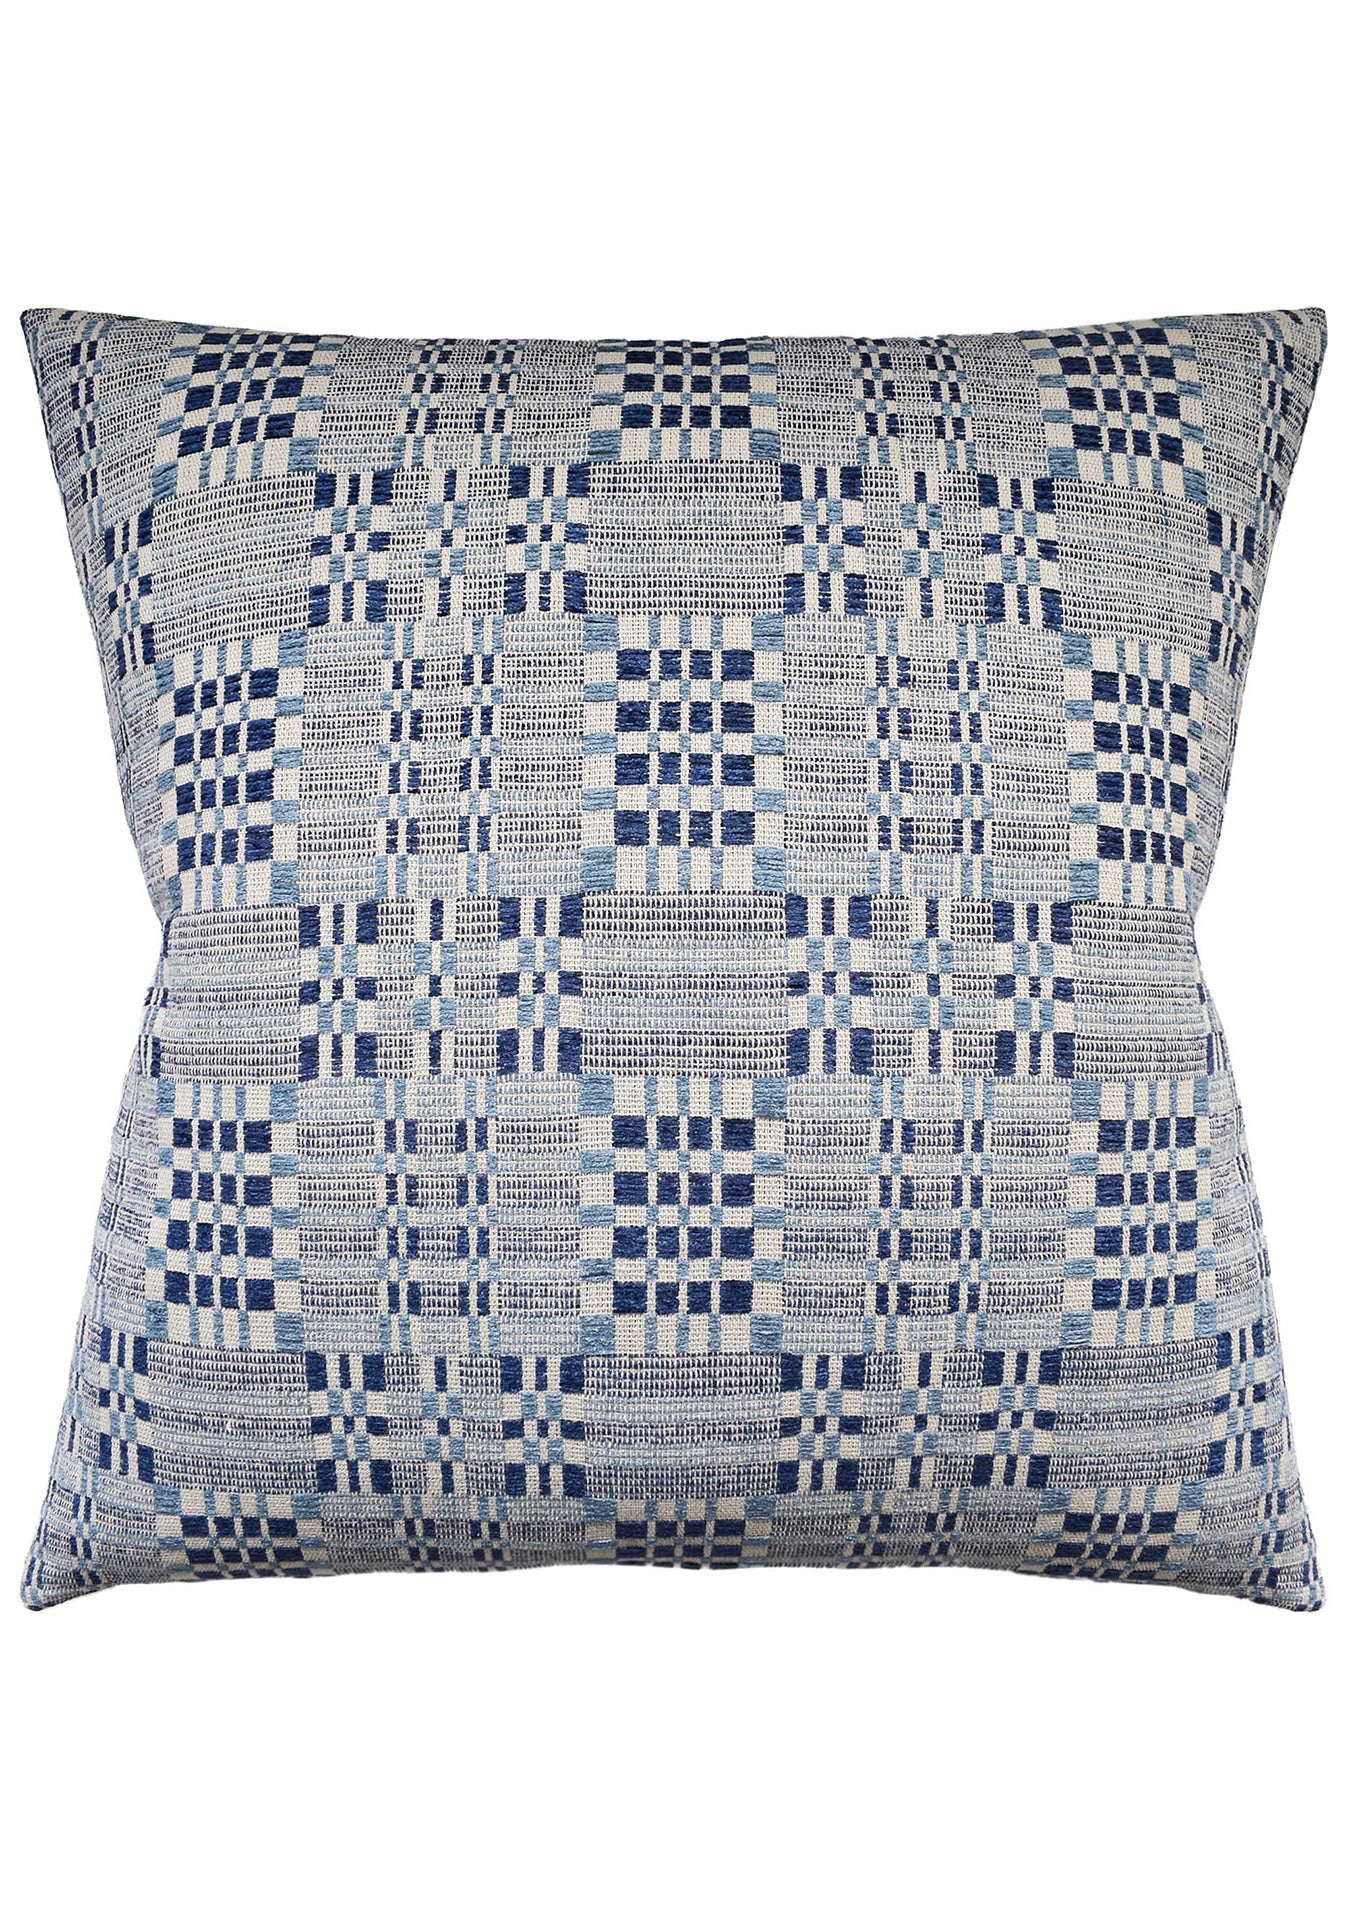 Decorative throw pillow featuring a geometric pattern in shades of blue and gray, inspired by the bungalow style of Scottsdale, Arizona. The design includes squares and rectangles arranged in a complex, woven look. The product is the Brim Indigo Pillow 22 x 22 from Ryan Studio.